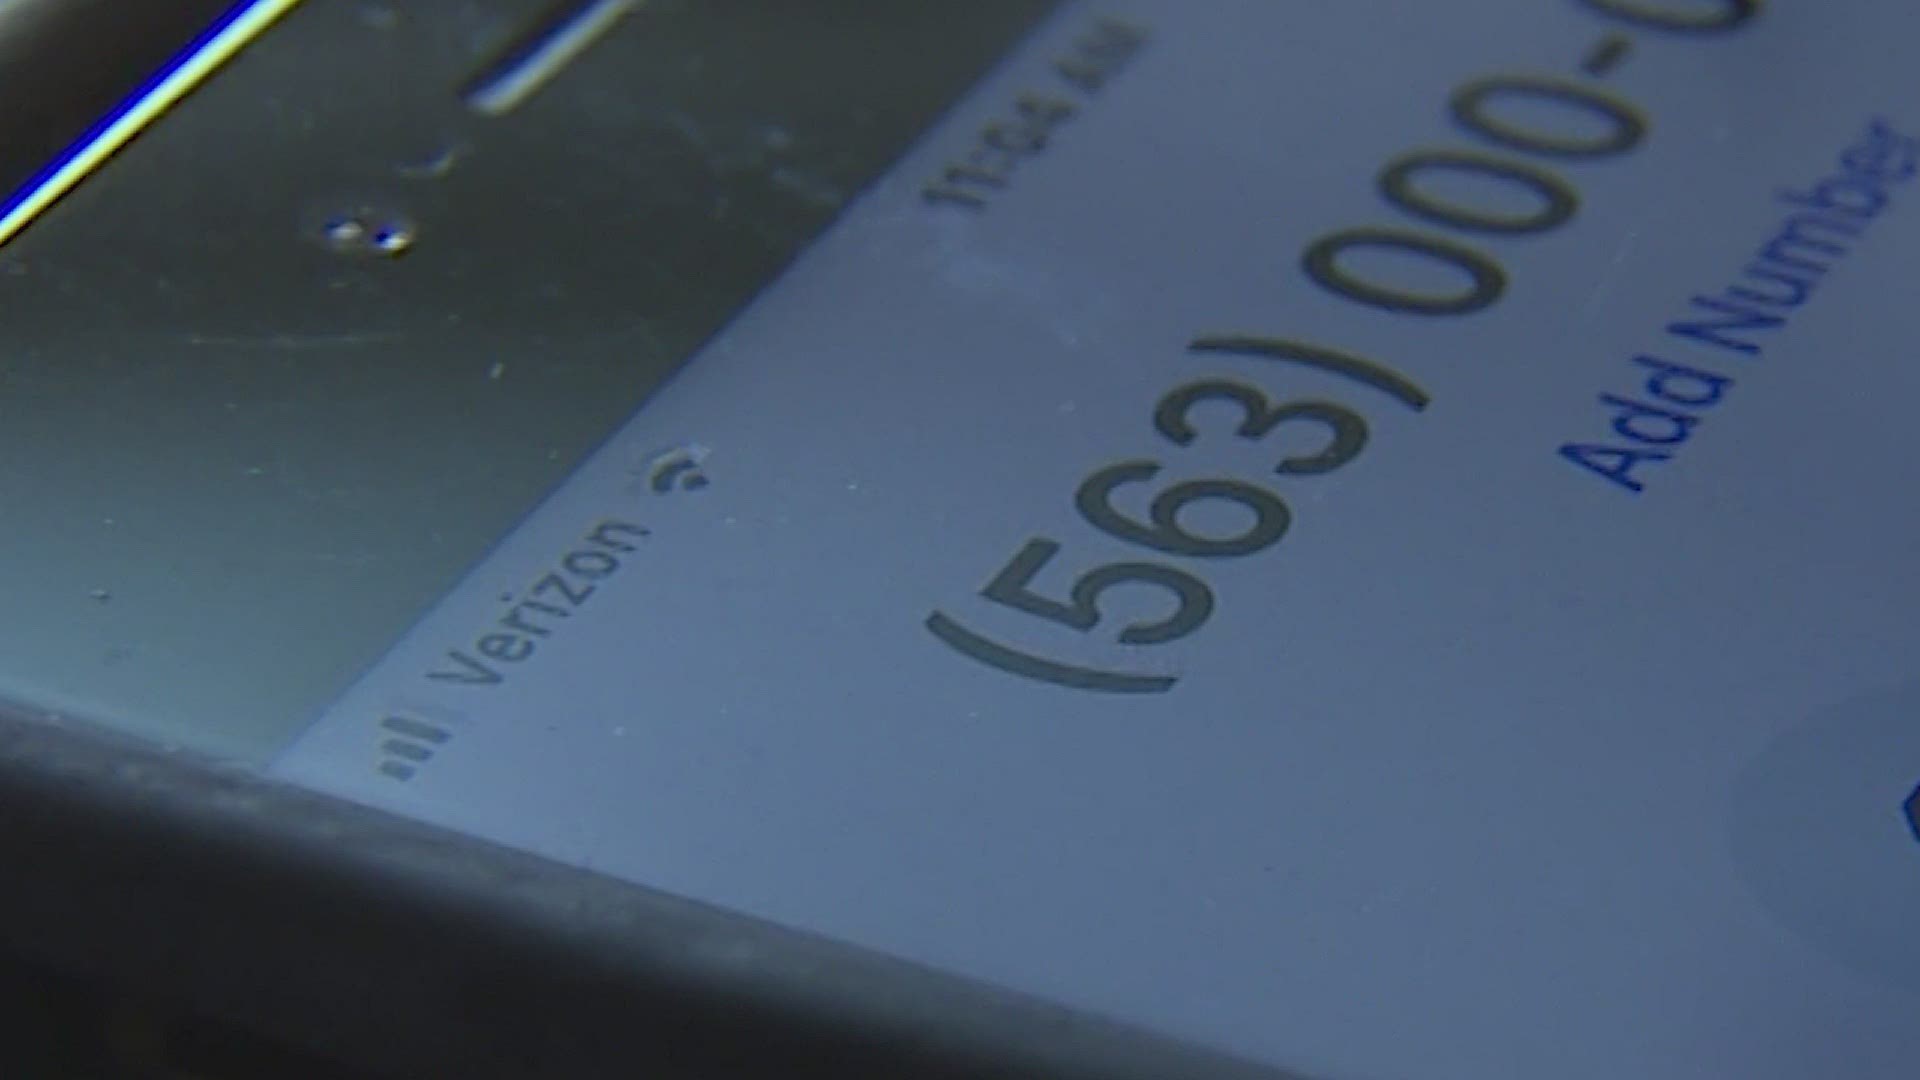 Scam experts say you can't always trust the number or name you see on your phone's caller ID. Scammers can manipulate what appears to get you to answer.